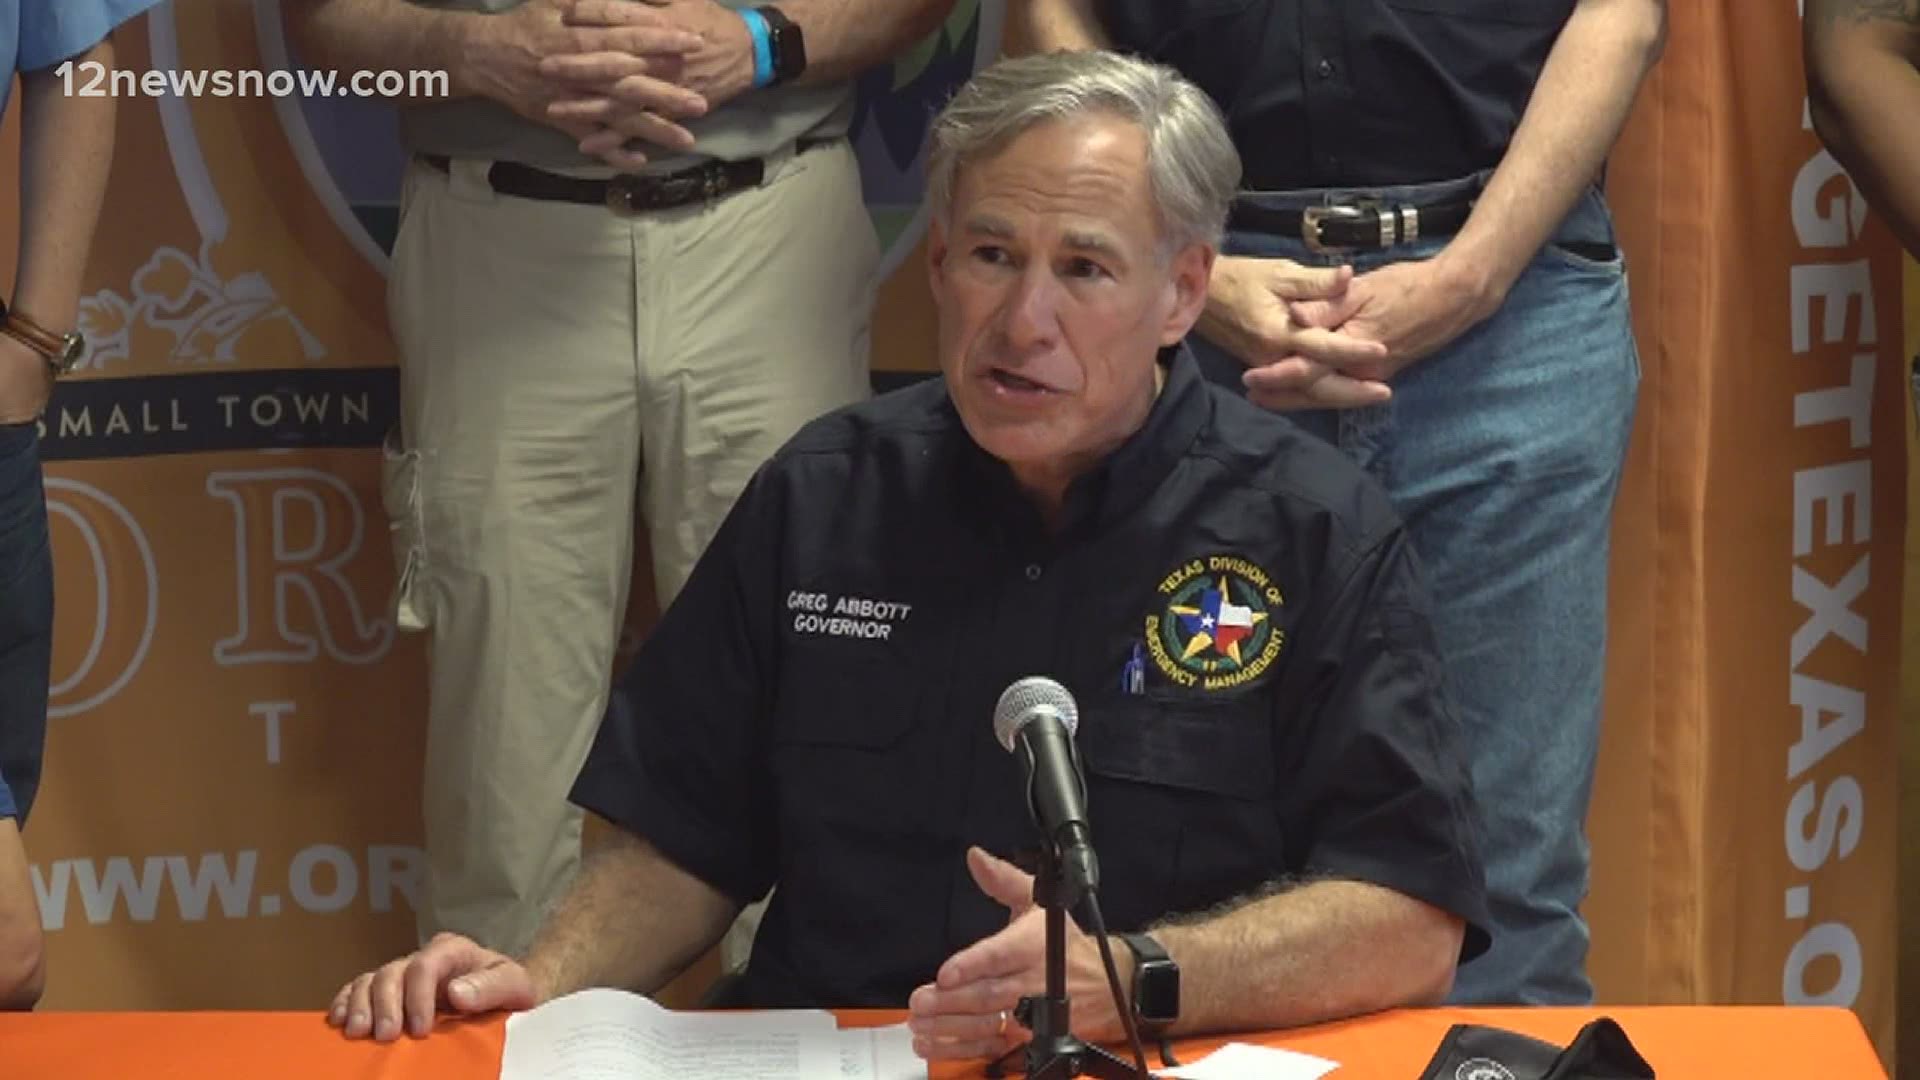 "When you consider the magnitude of the damage that could have occurred here, we did dodge a bullet," Gov. Abbott said.